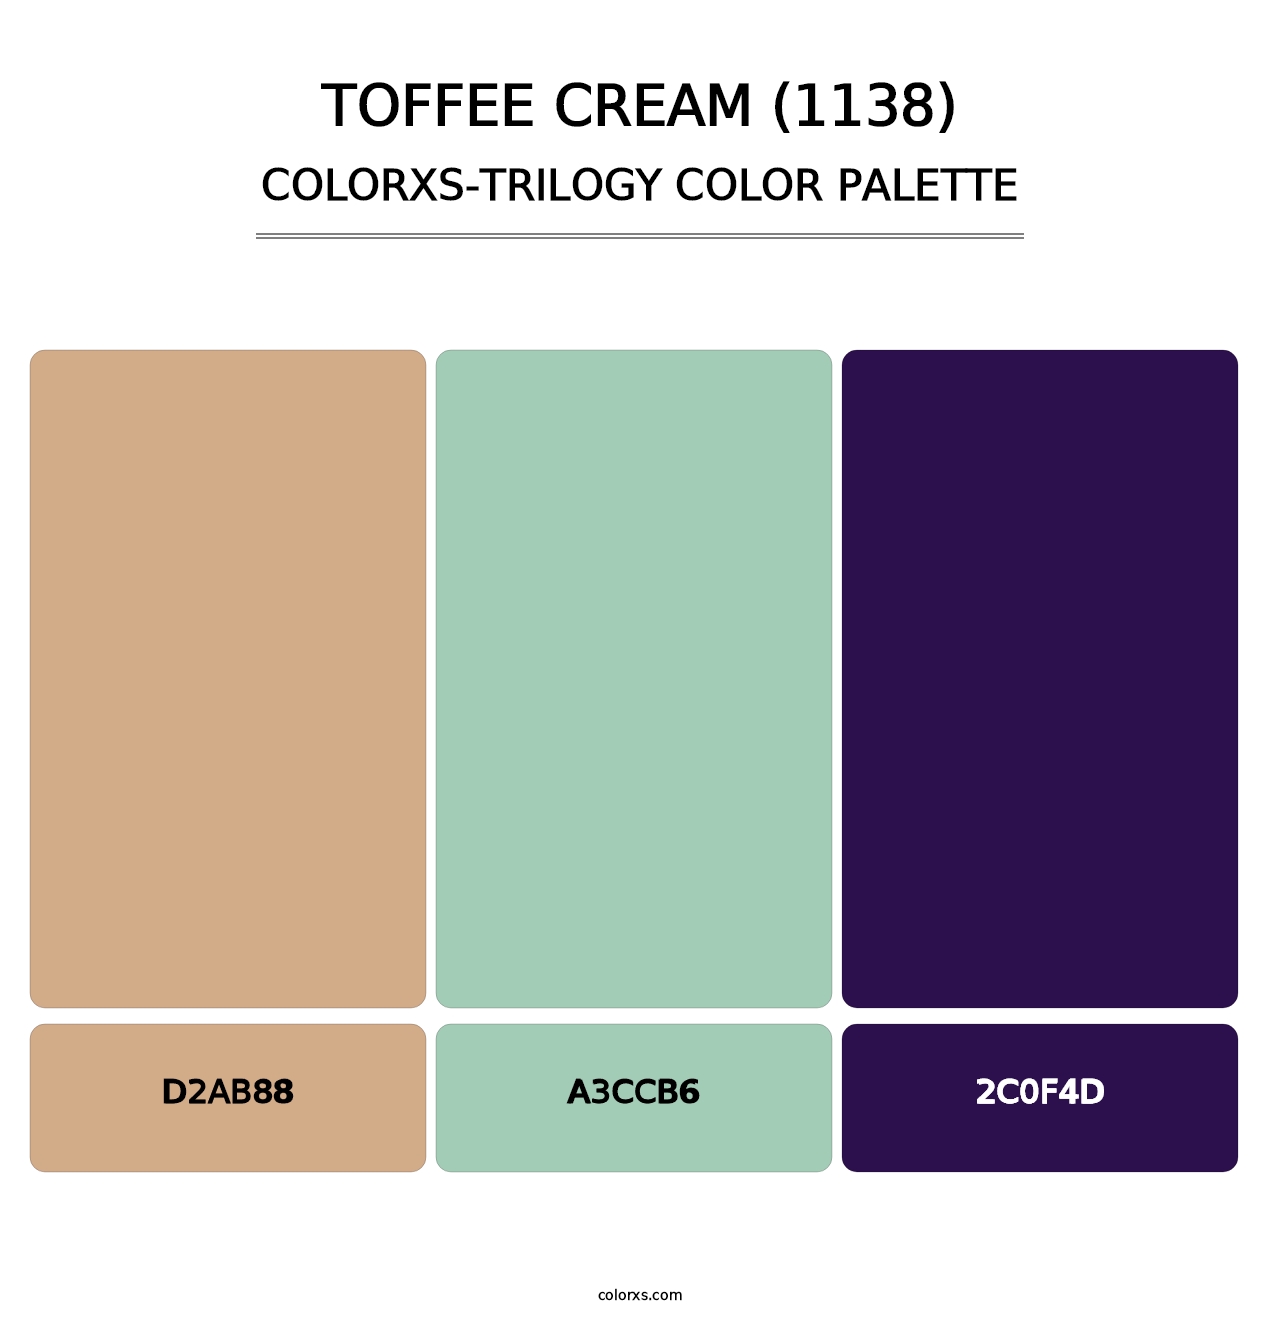 Toffee Cream (1138) - Colorxs Trilogy Palette